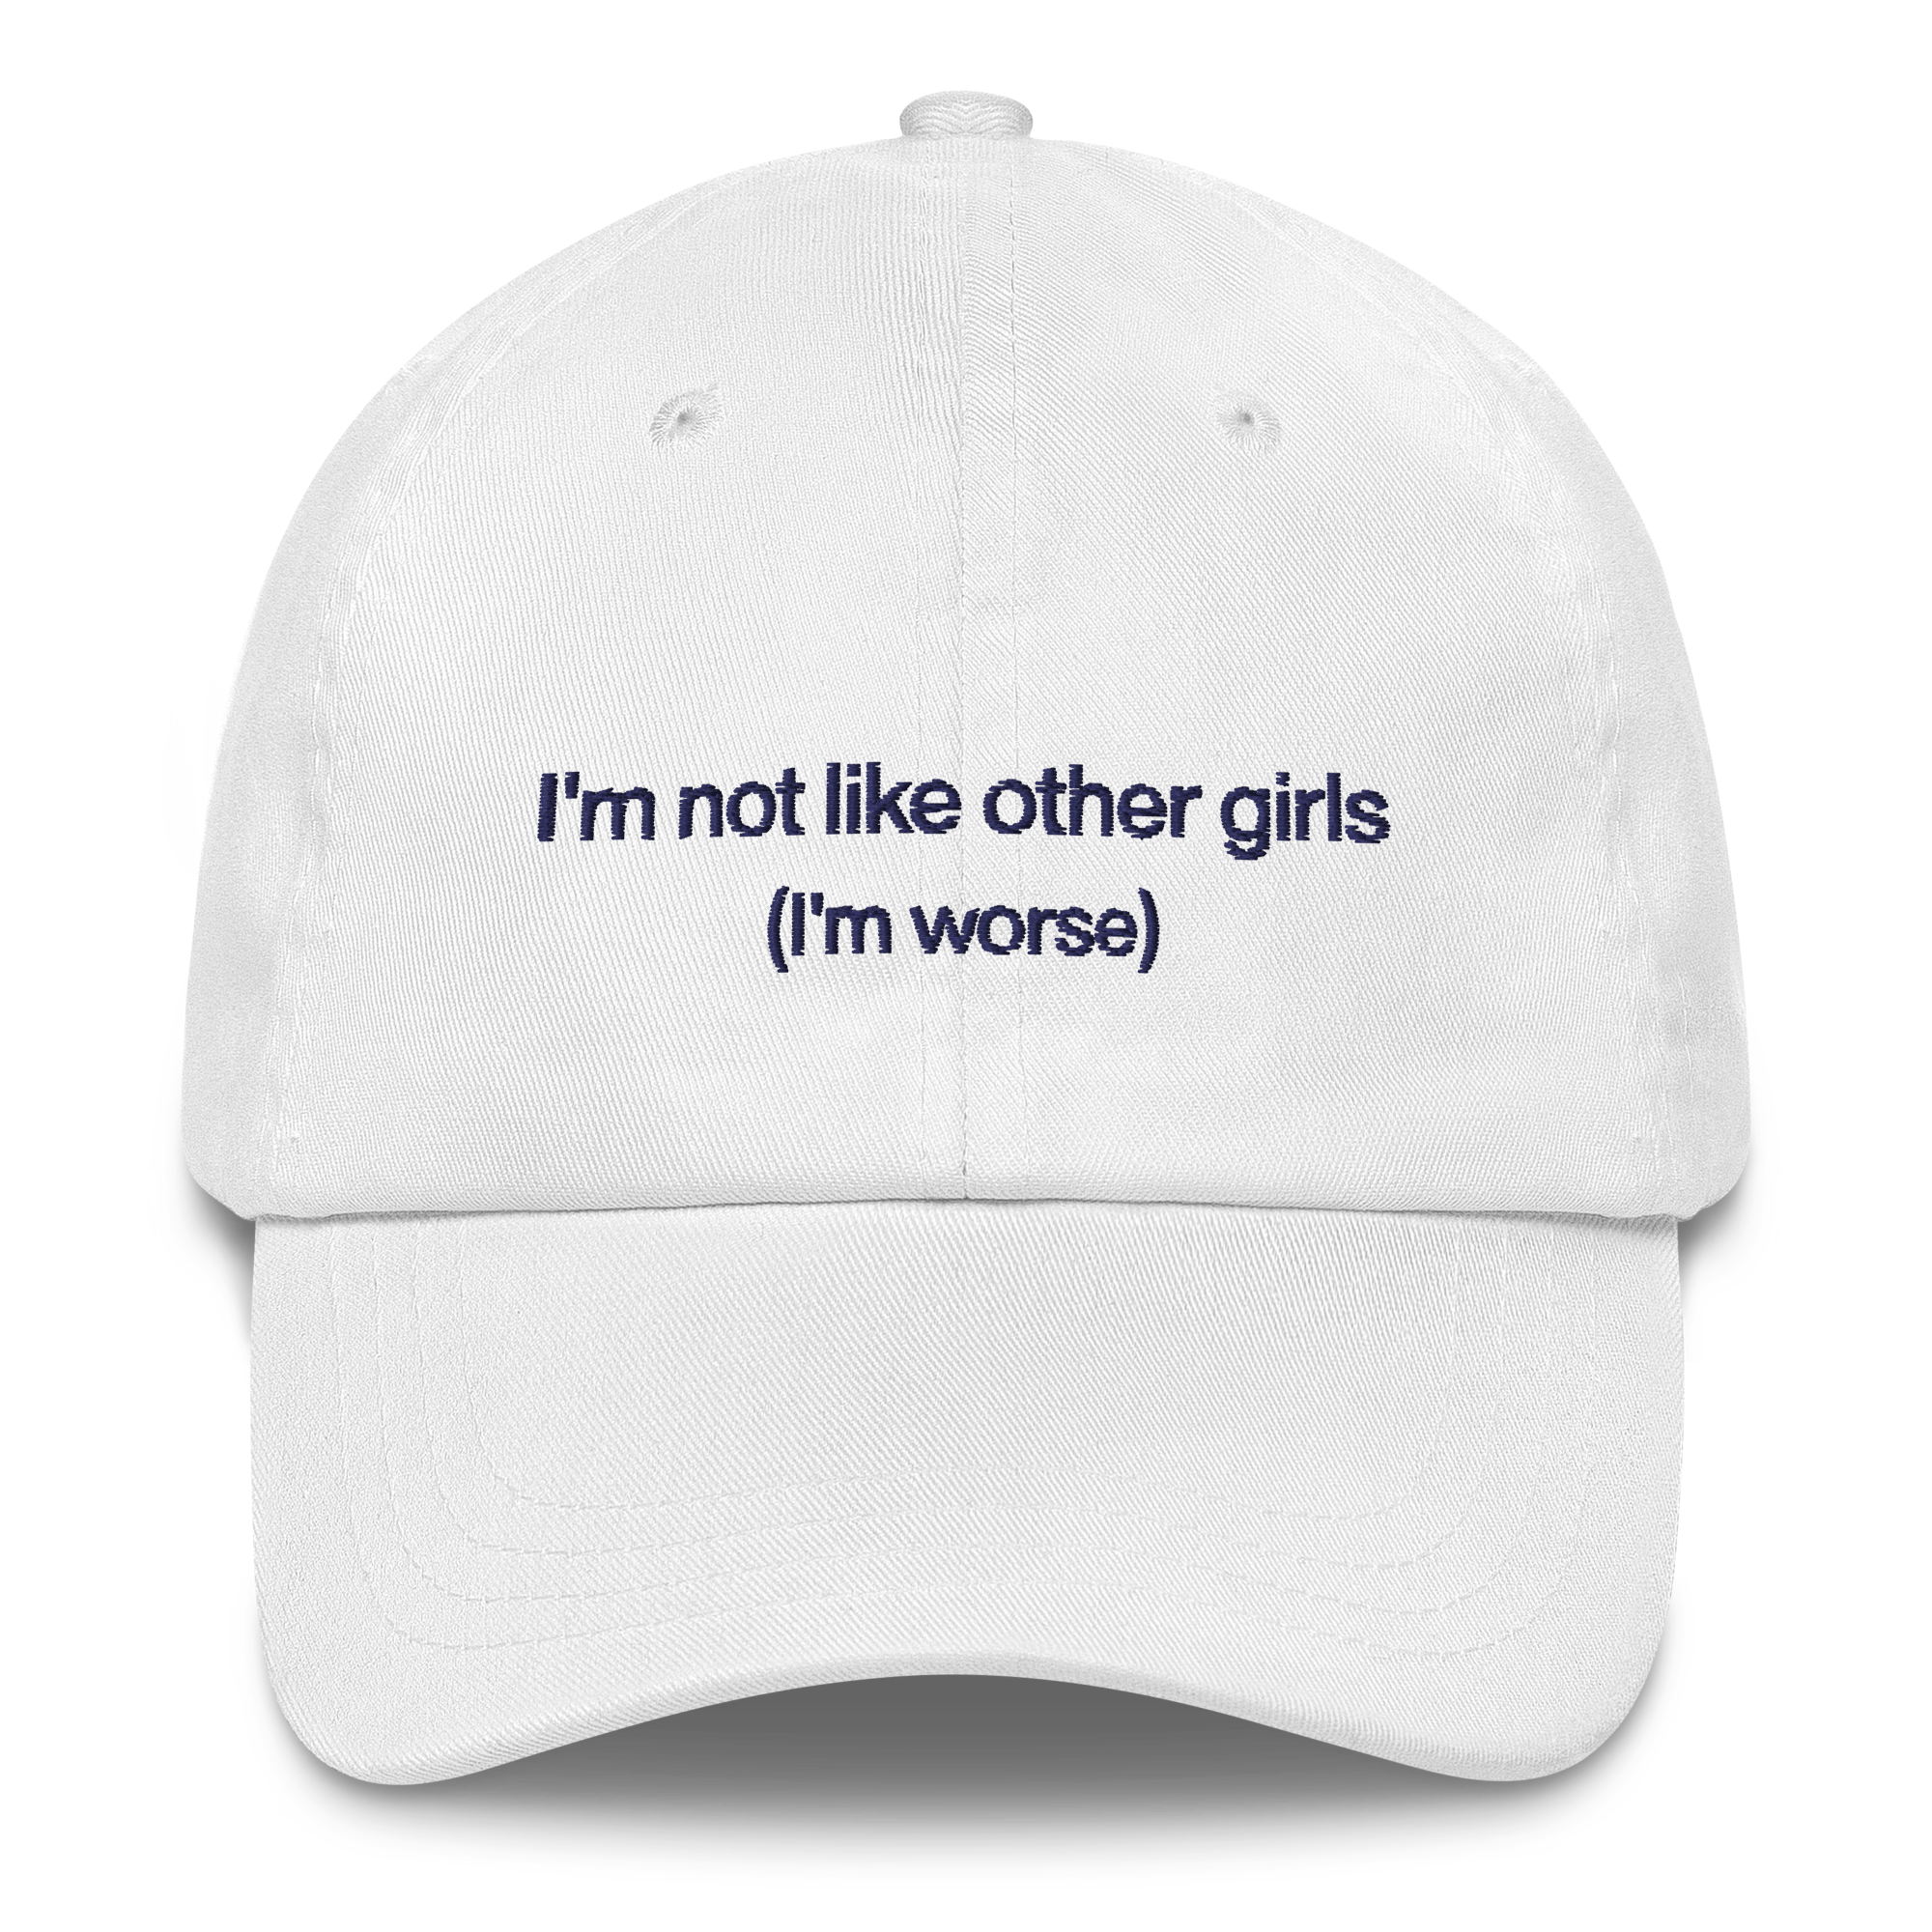 classic-dad-hat-white-front-667b1f82855ce.png